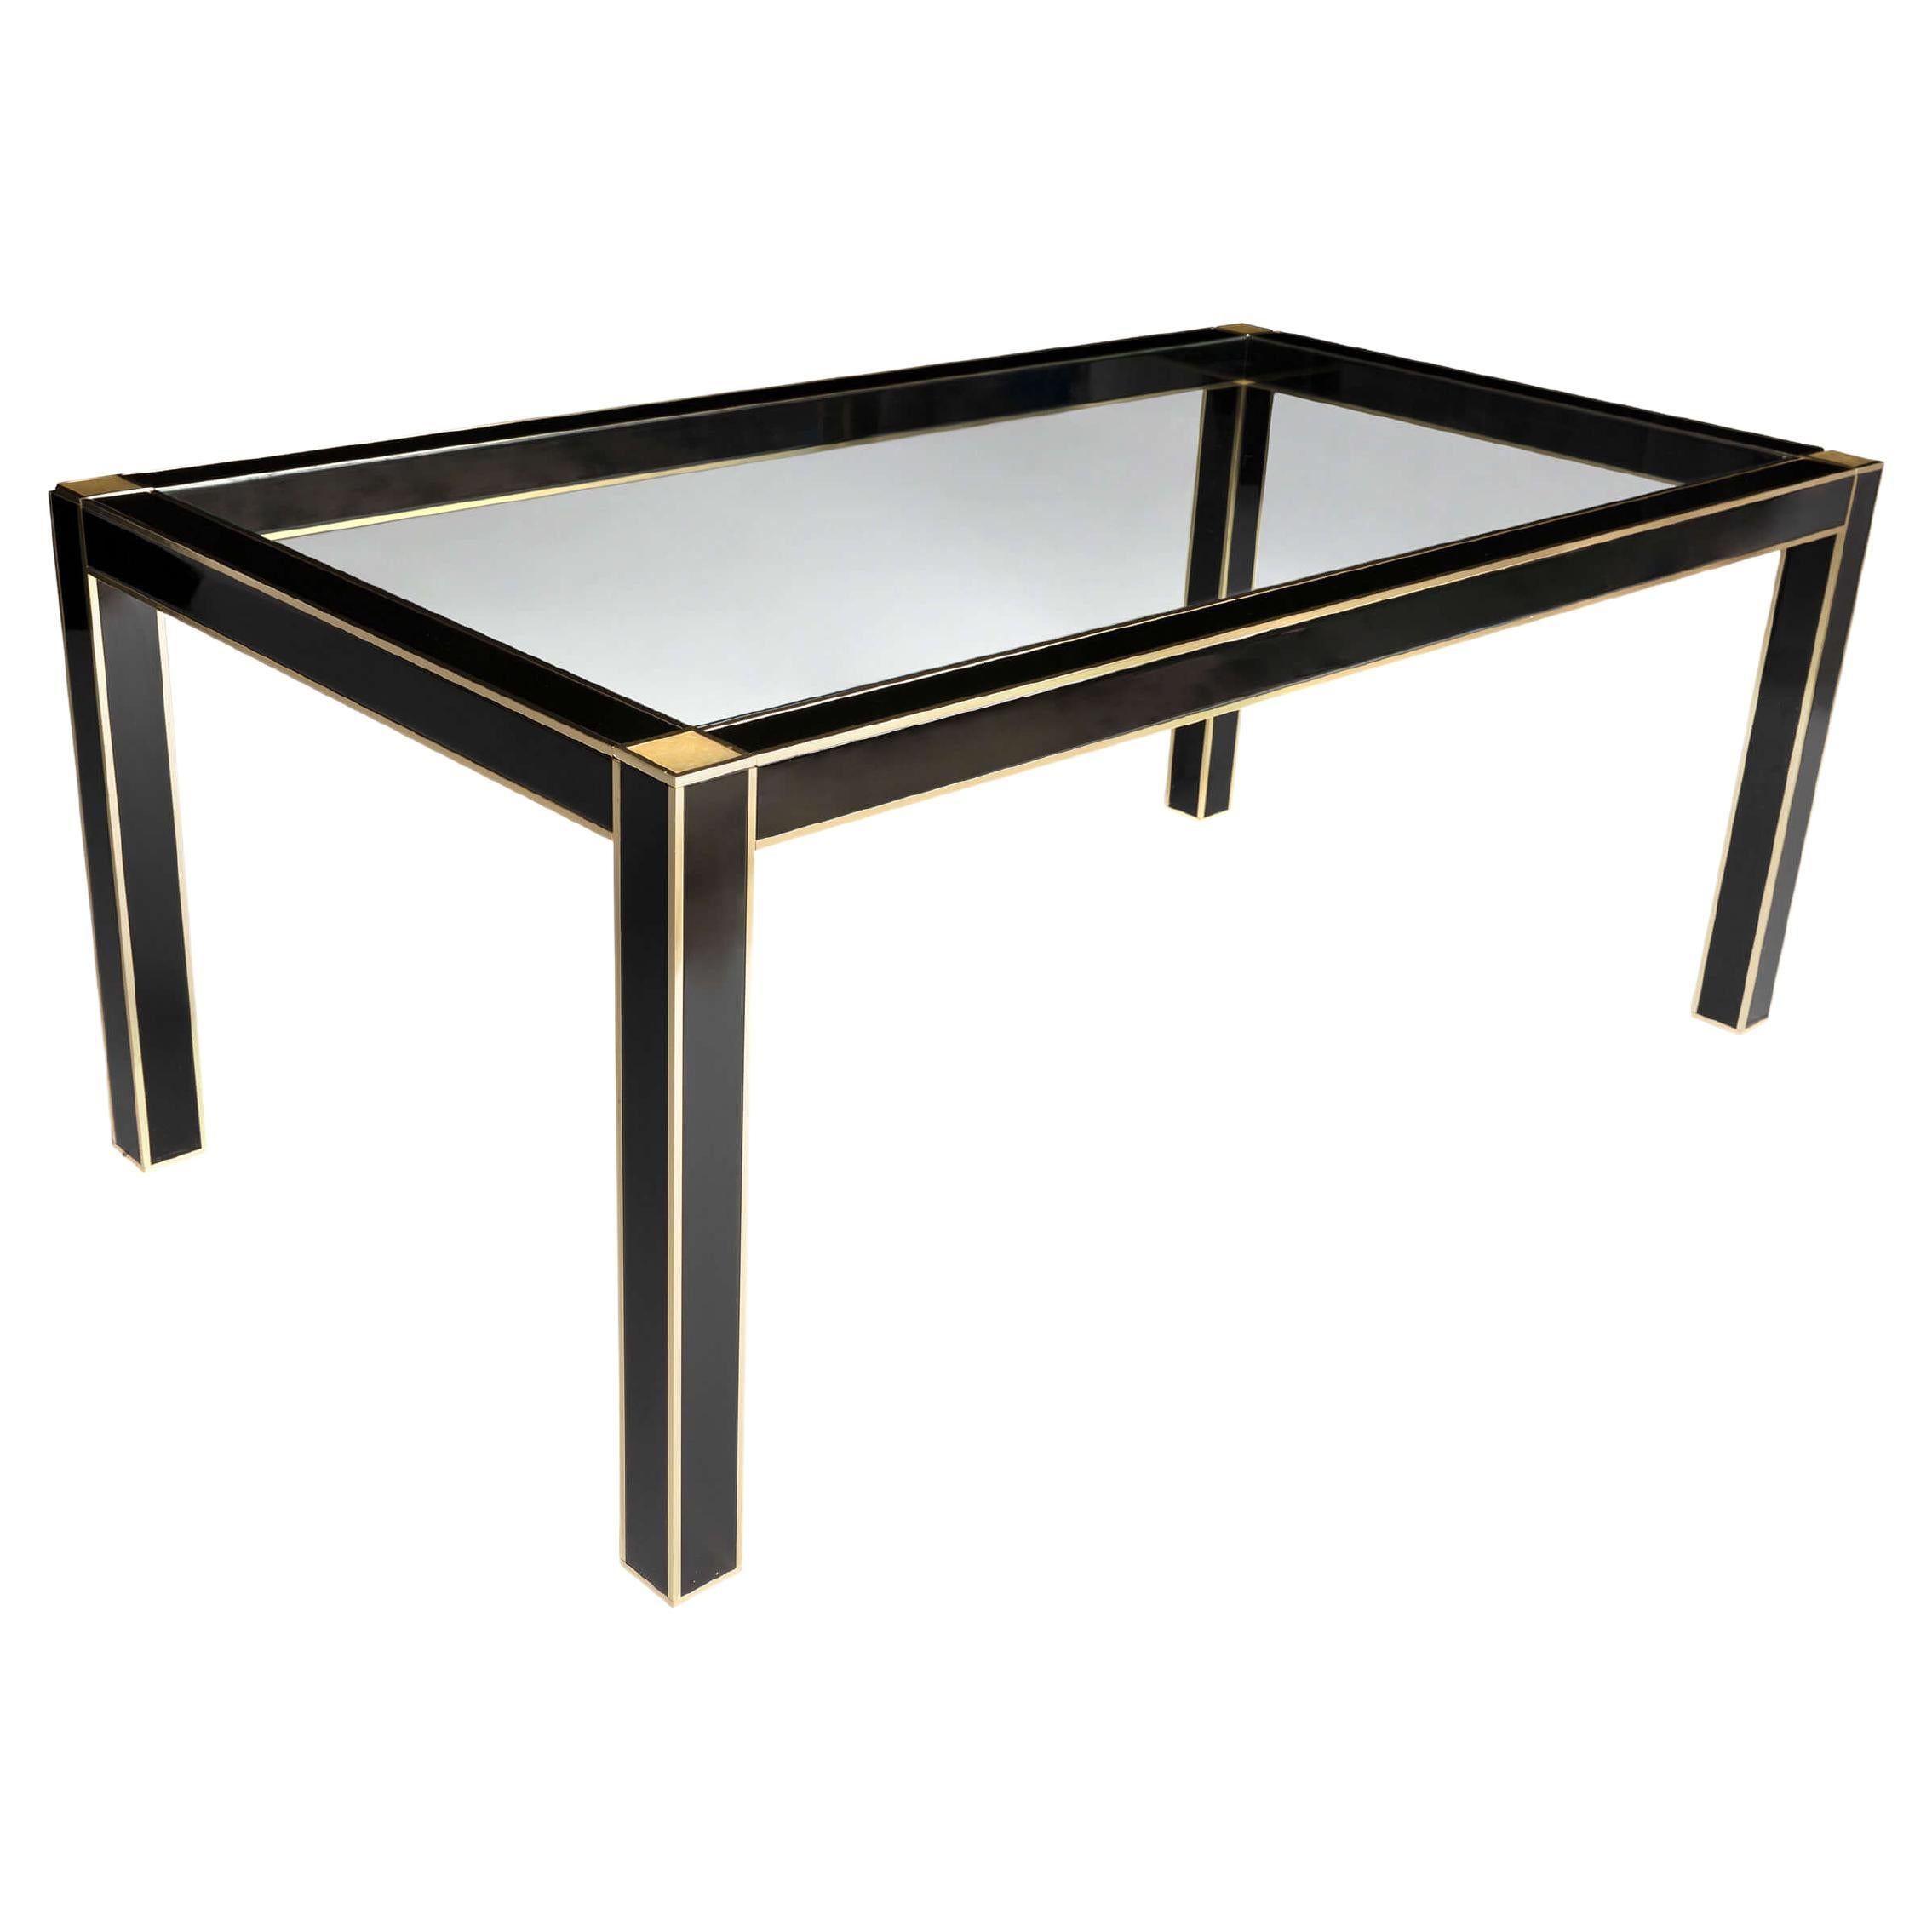 Dining Table for Roche Bobois in Black Lacquer by Pierre Cardin, circa 1980